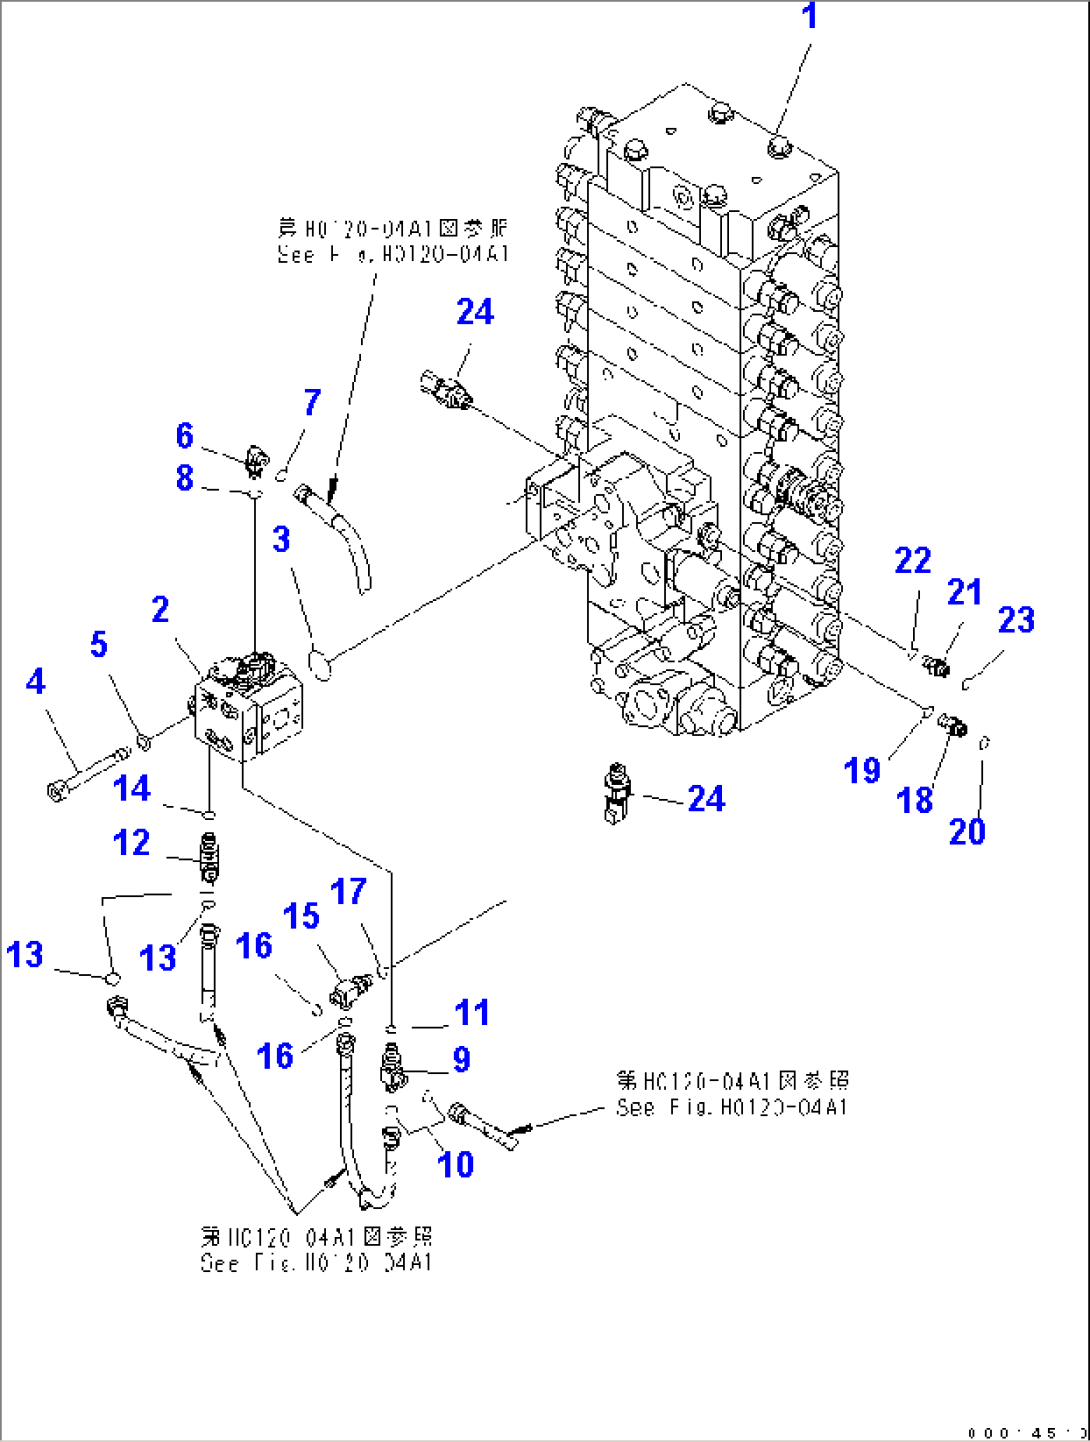 MAIN VALVE (REDUCING VALVE AND CONNECTING PARTS) (4 ACTUATOR)